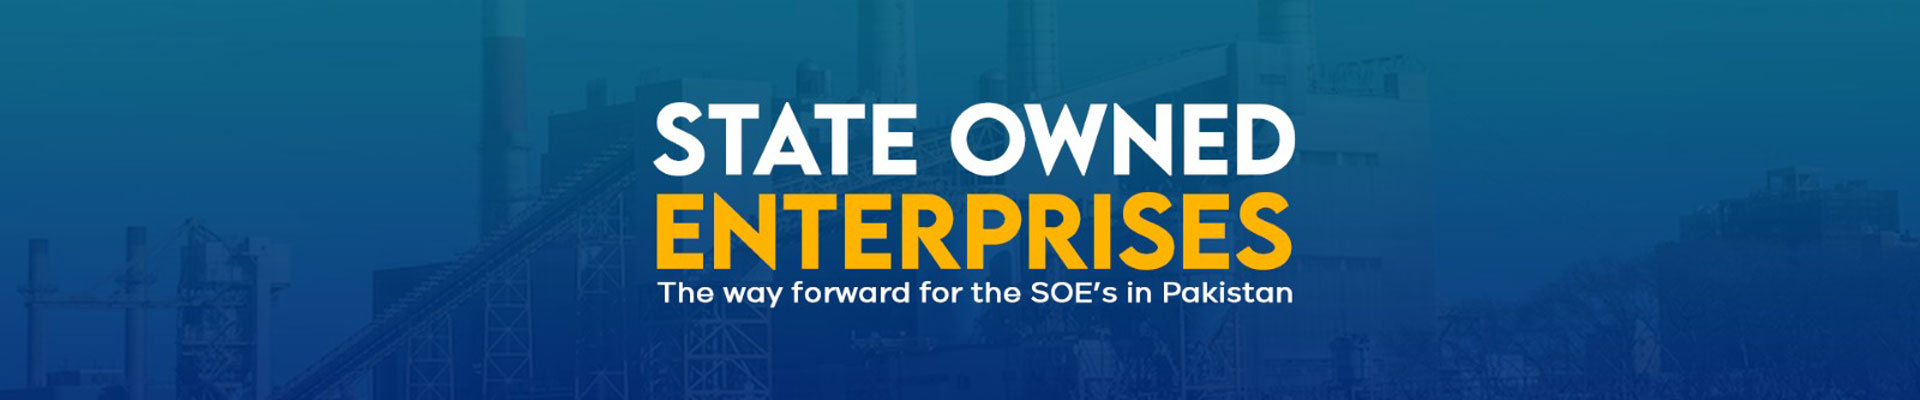 State Owned Enterprises